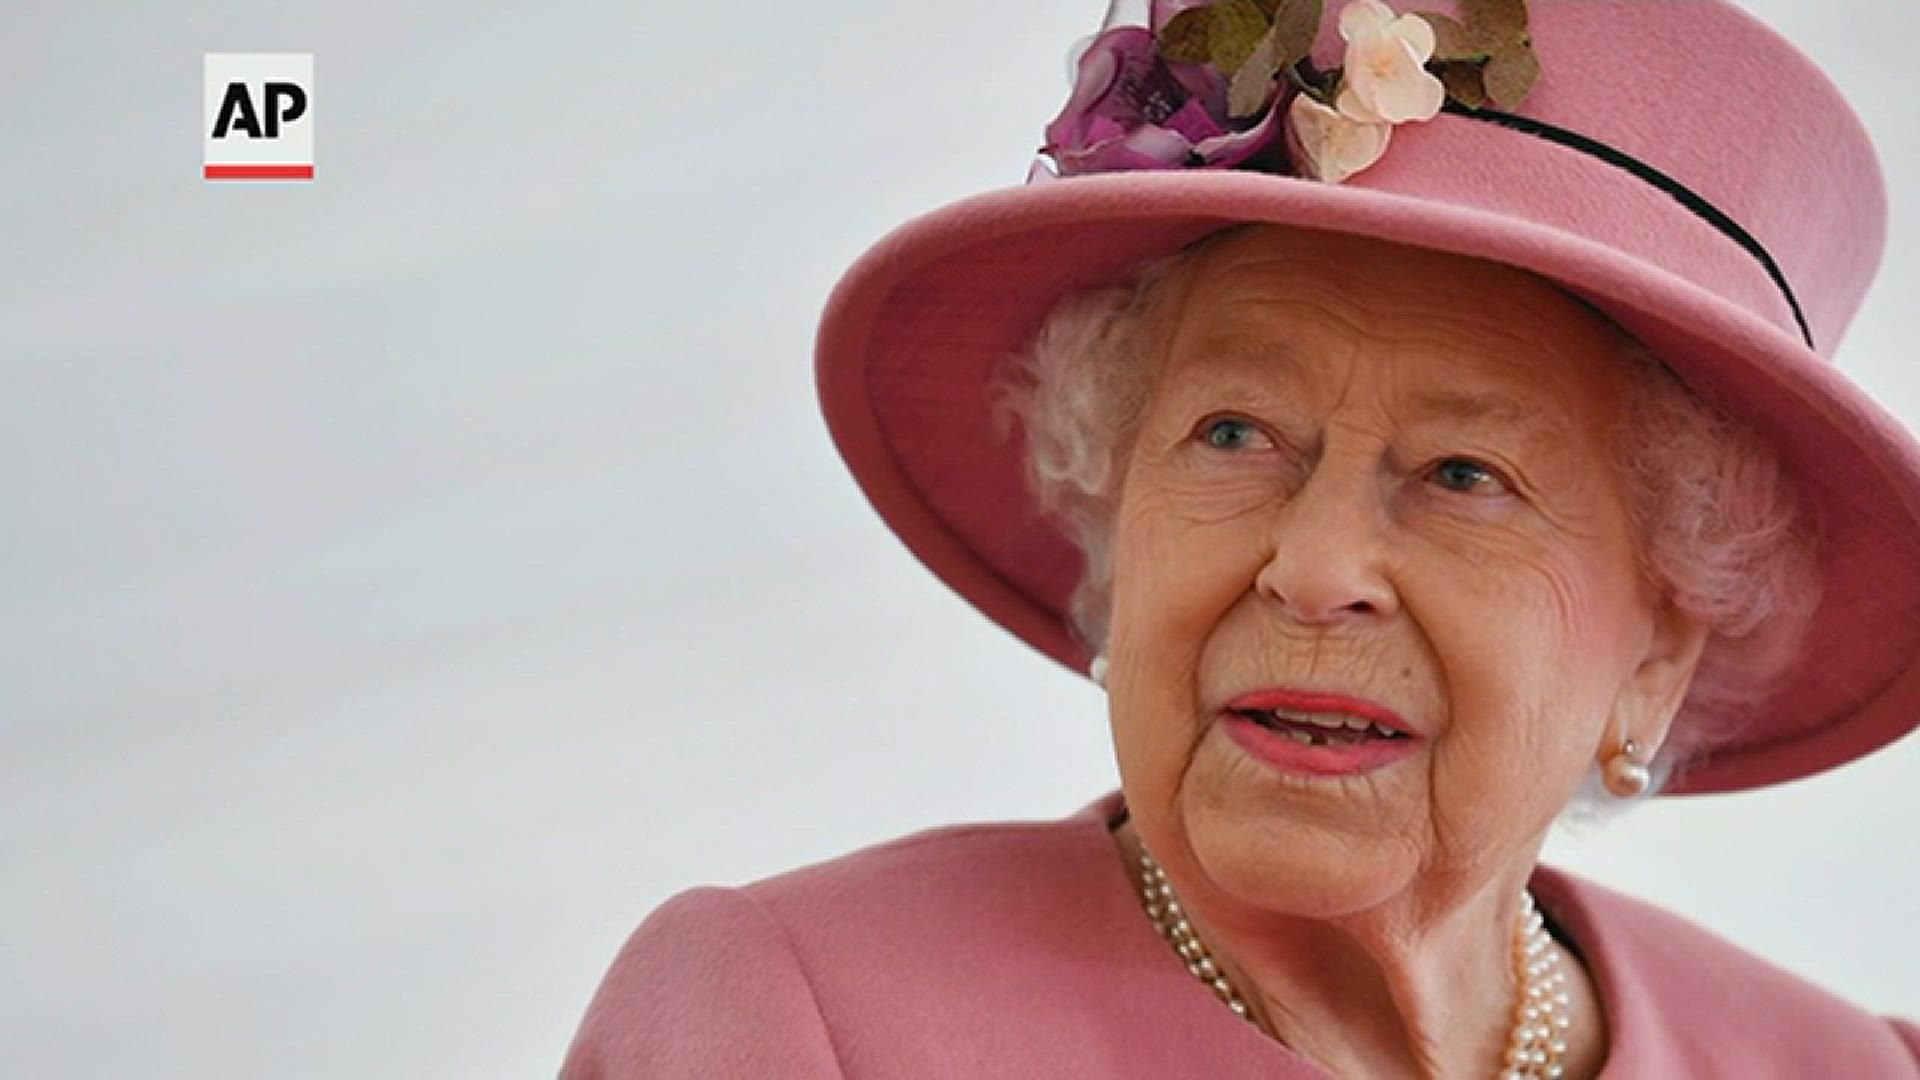 Queen Elizabeth II, Britain’s longest-reigning monarch and a rock of stability across much of a turbulent century, has died. She was 96.